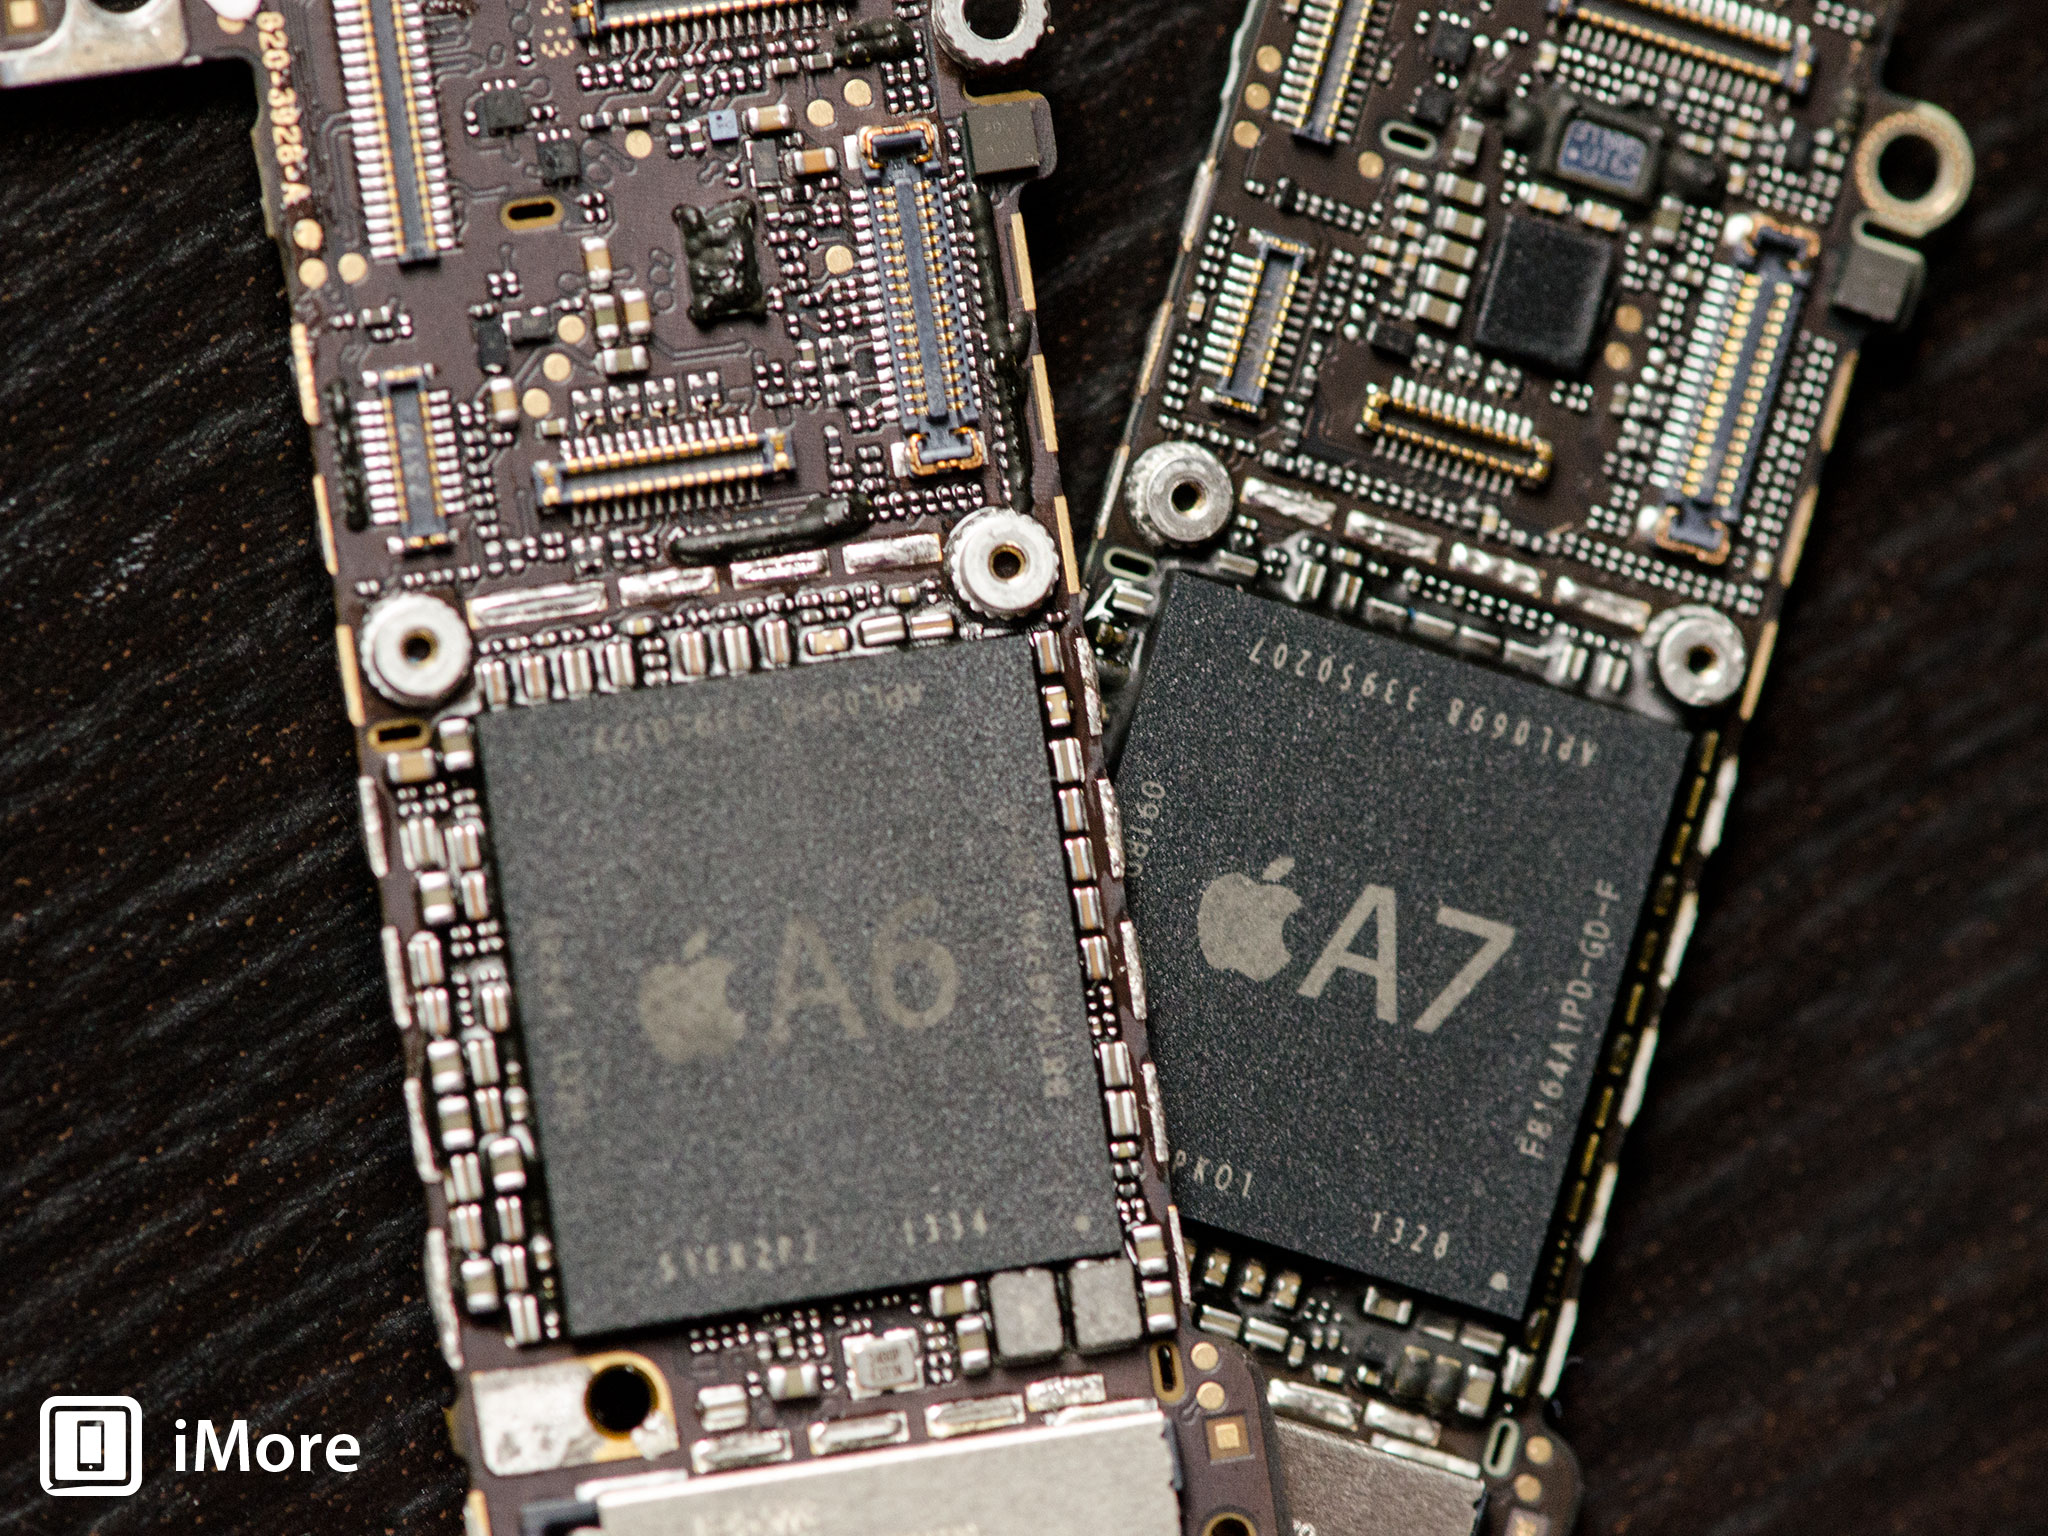 And just for fun.. iPhone 5s vs iPhone 5c comparison photos!